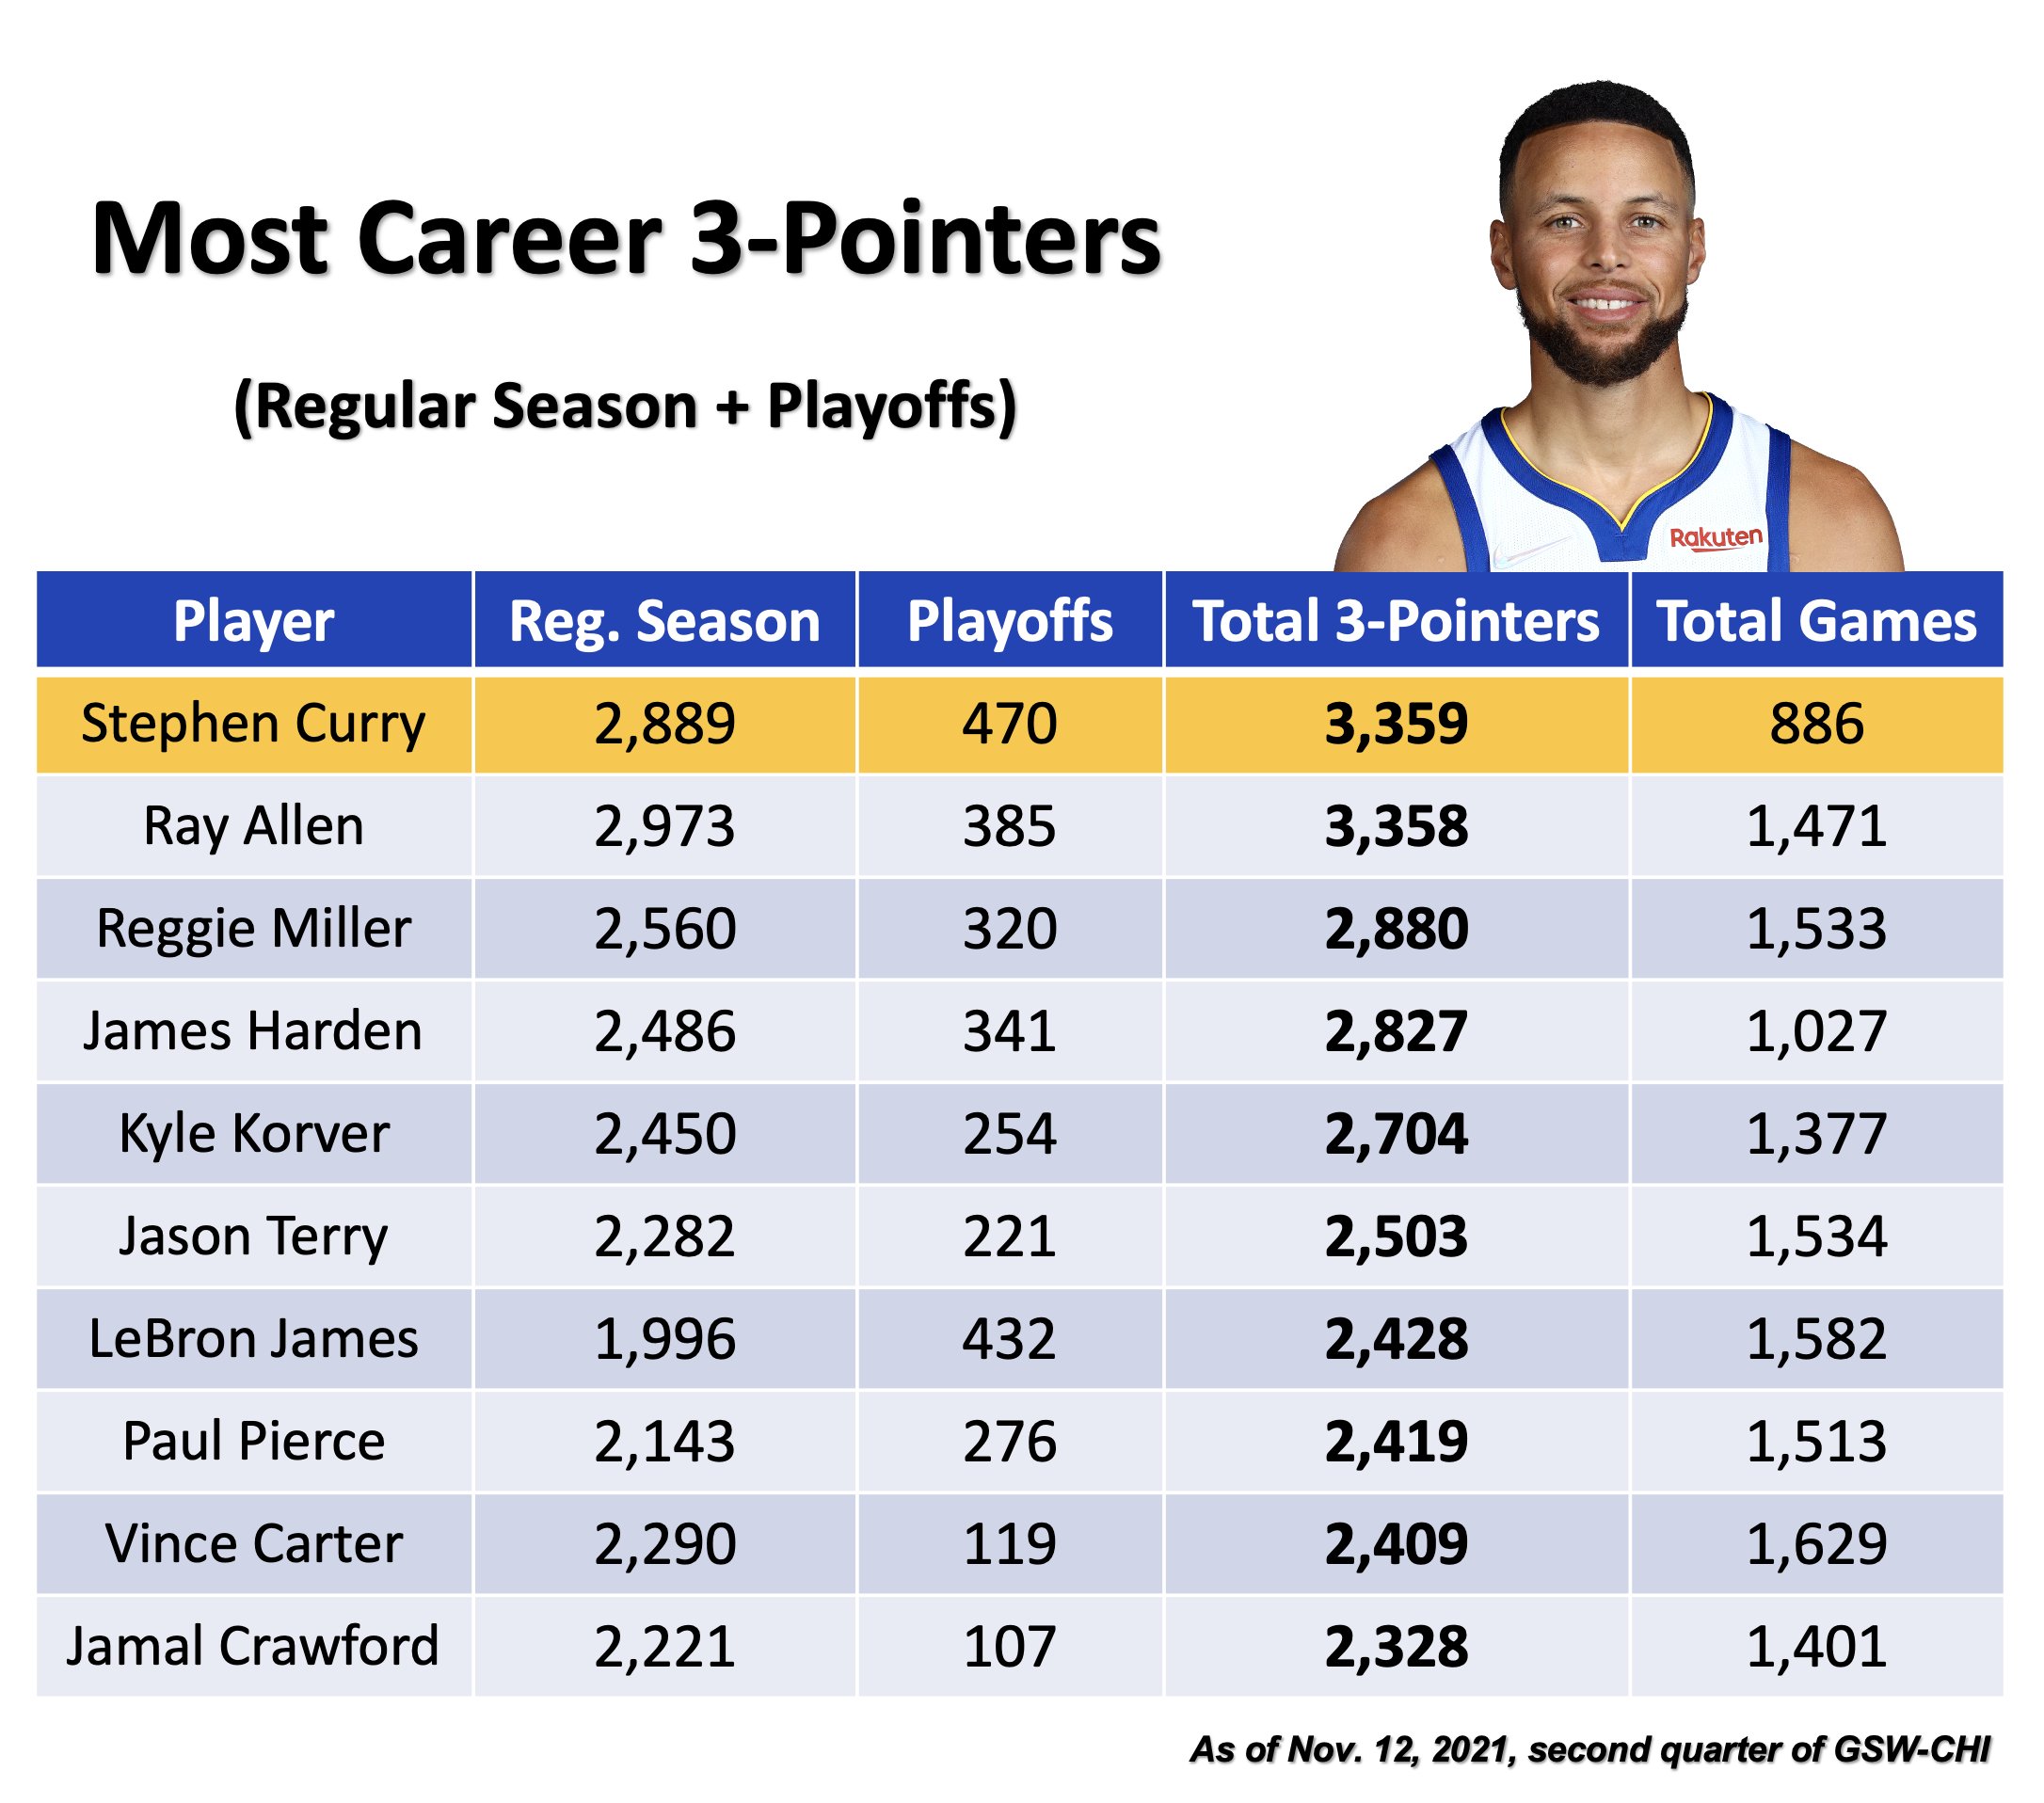 What 3-point records don't already belong to Steph Curry?